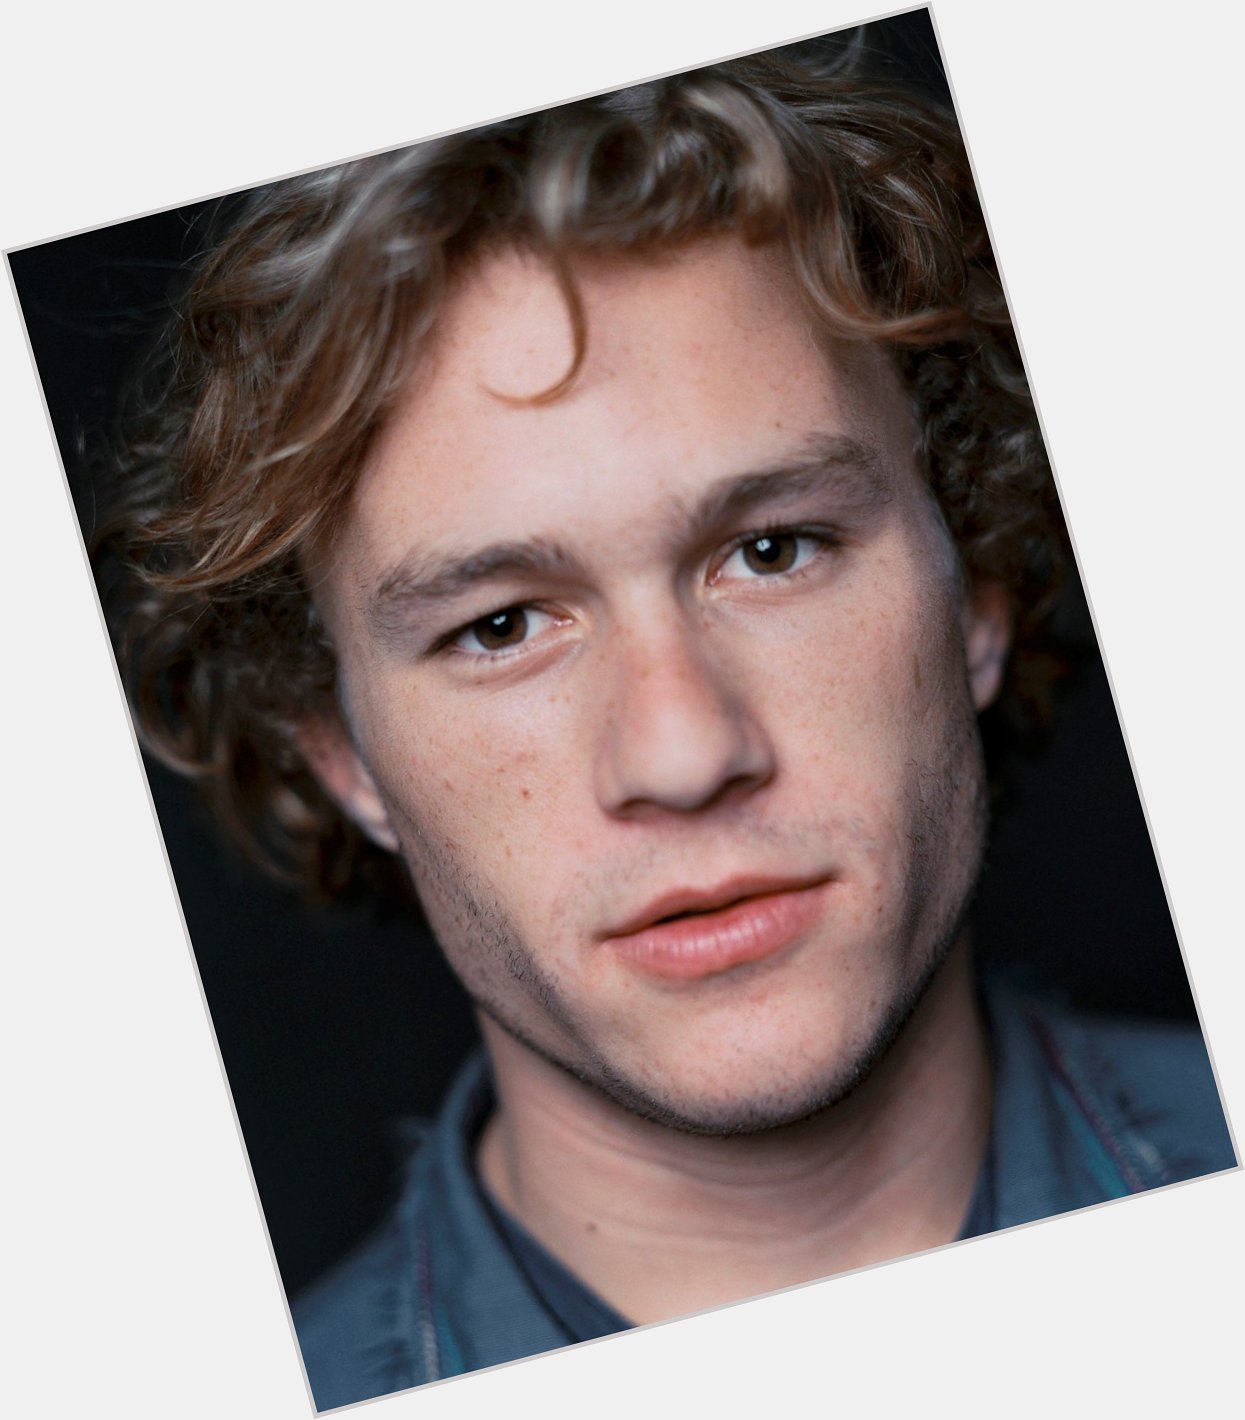 Happy Birthday to a talented actor gone too soon, Heath Ledger (R.I.P). Today he would have turned 39. 